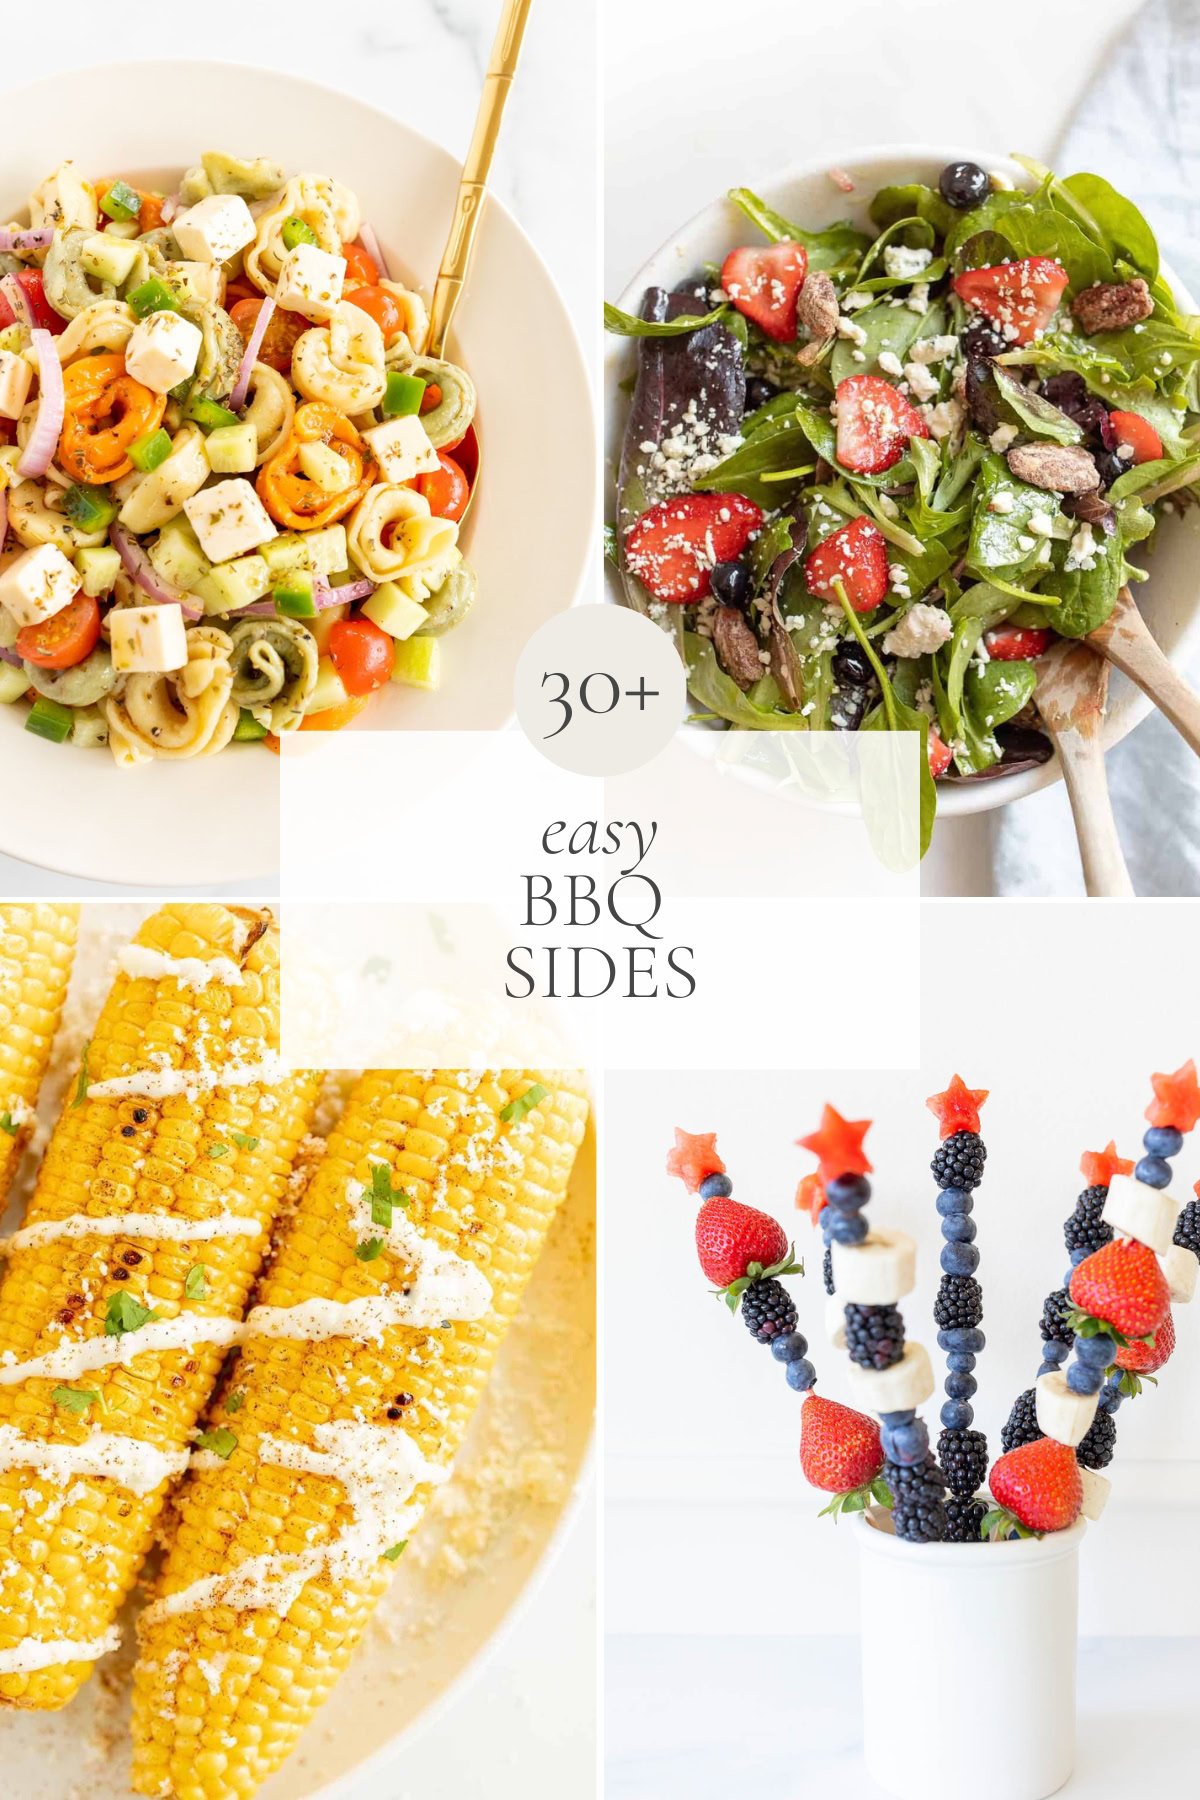 Four images of BBQ sides: a pasta salad, a mixed greens salad, corn on the cob with cheese and spices, and fruit skewers with blueberries and strawberries. Text in the center reads "30+ easy BBQ SIDES." Perfect accompaniments for your next outdoor gathering!